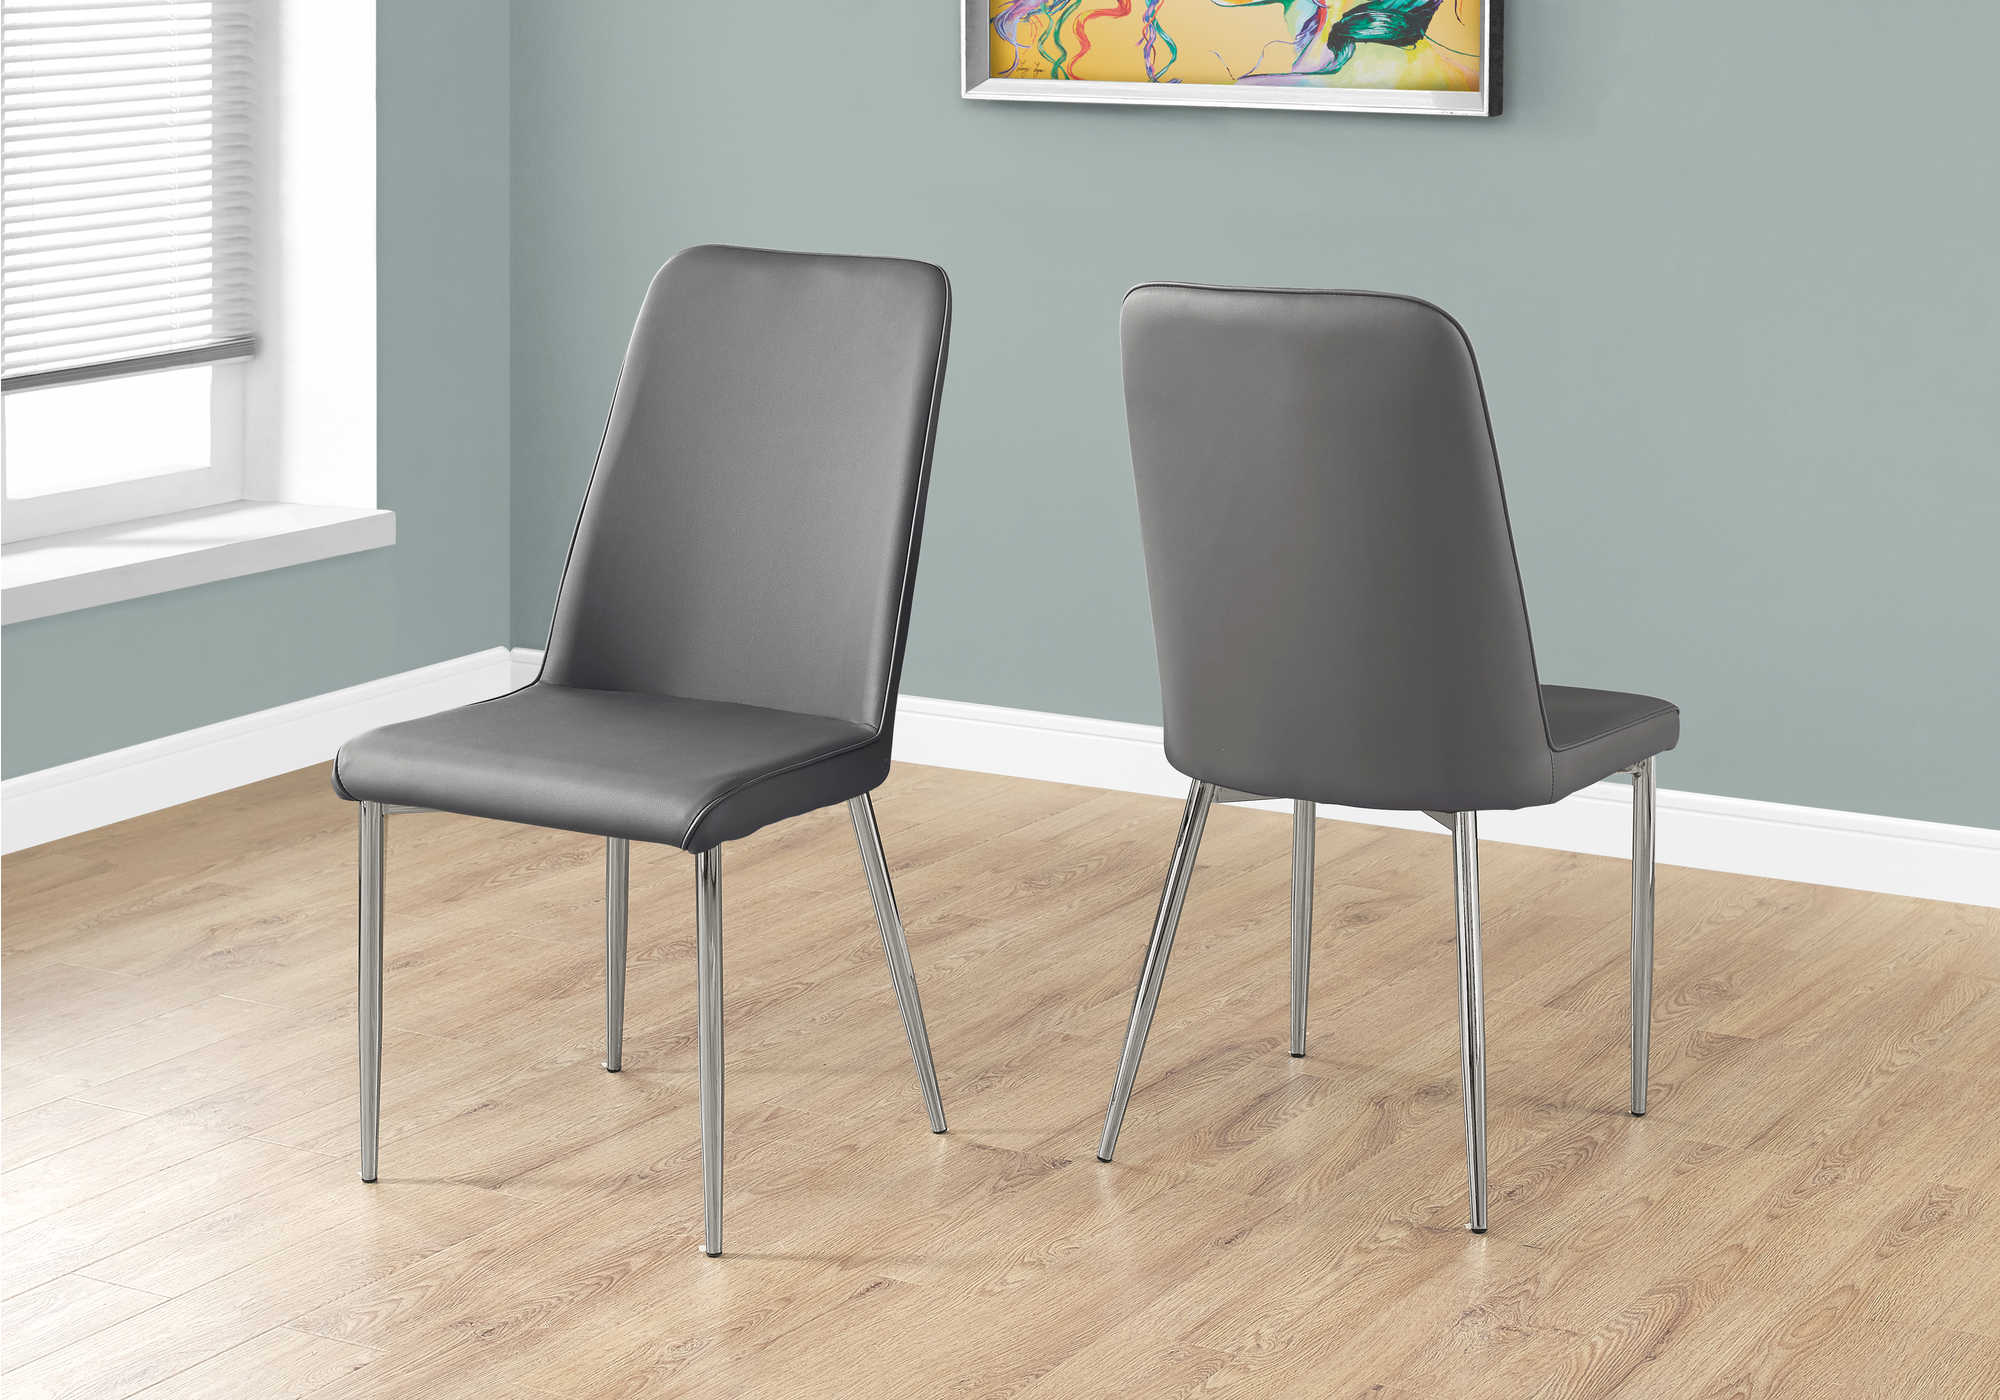 DINING CHAIR - 2PCS / 37"H / GREY LEATHER-LOOK / CHROME